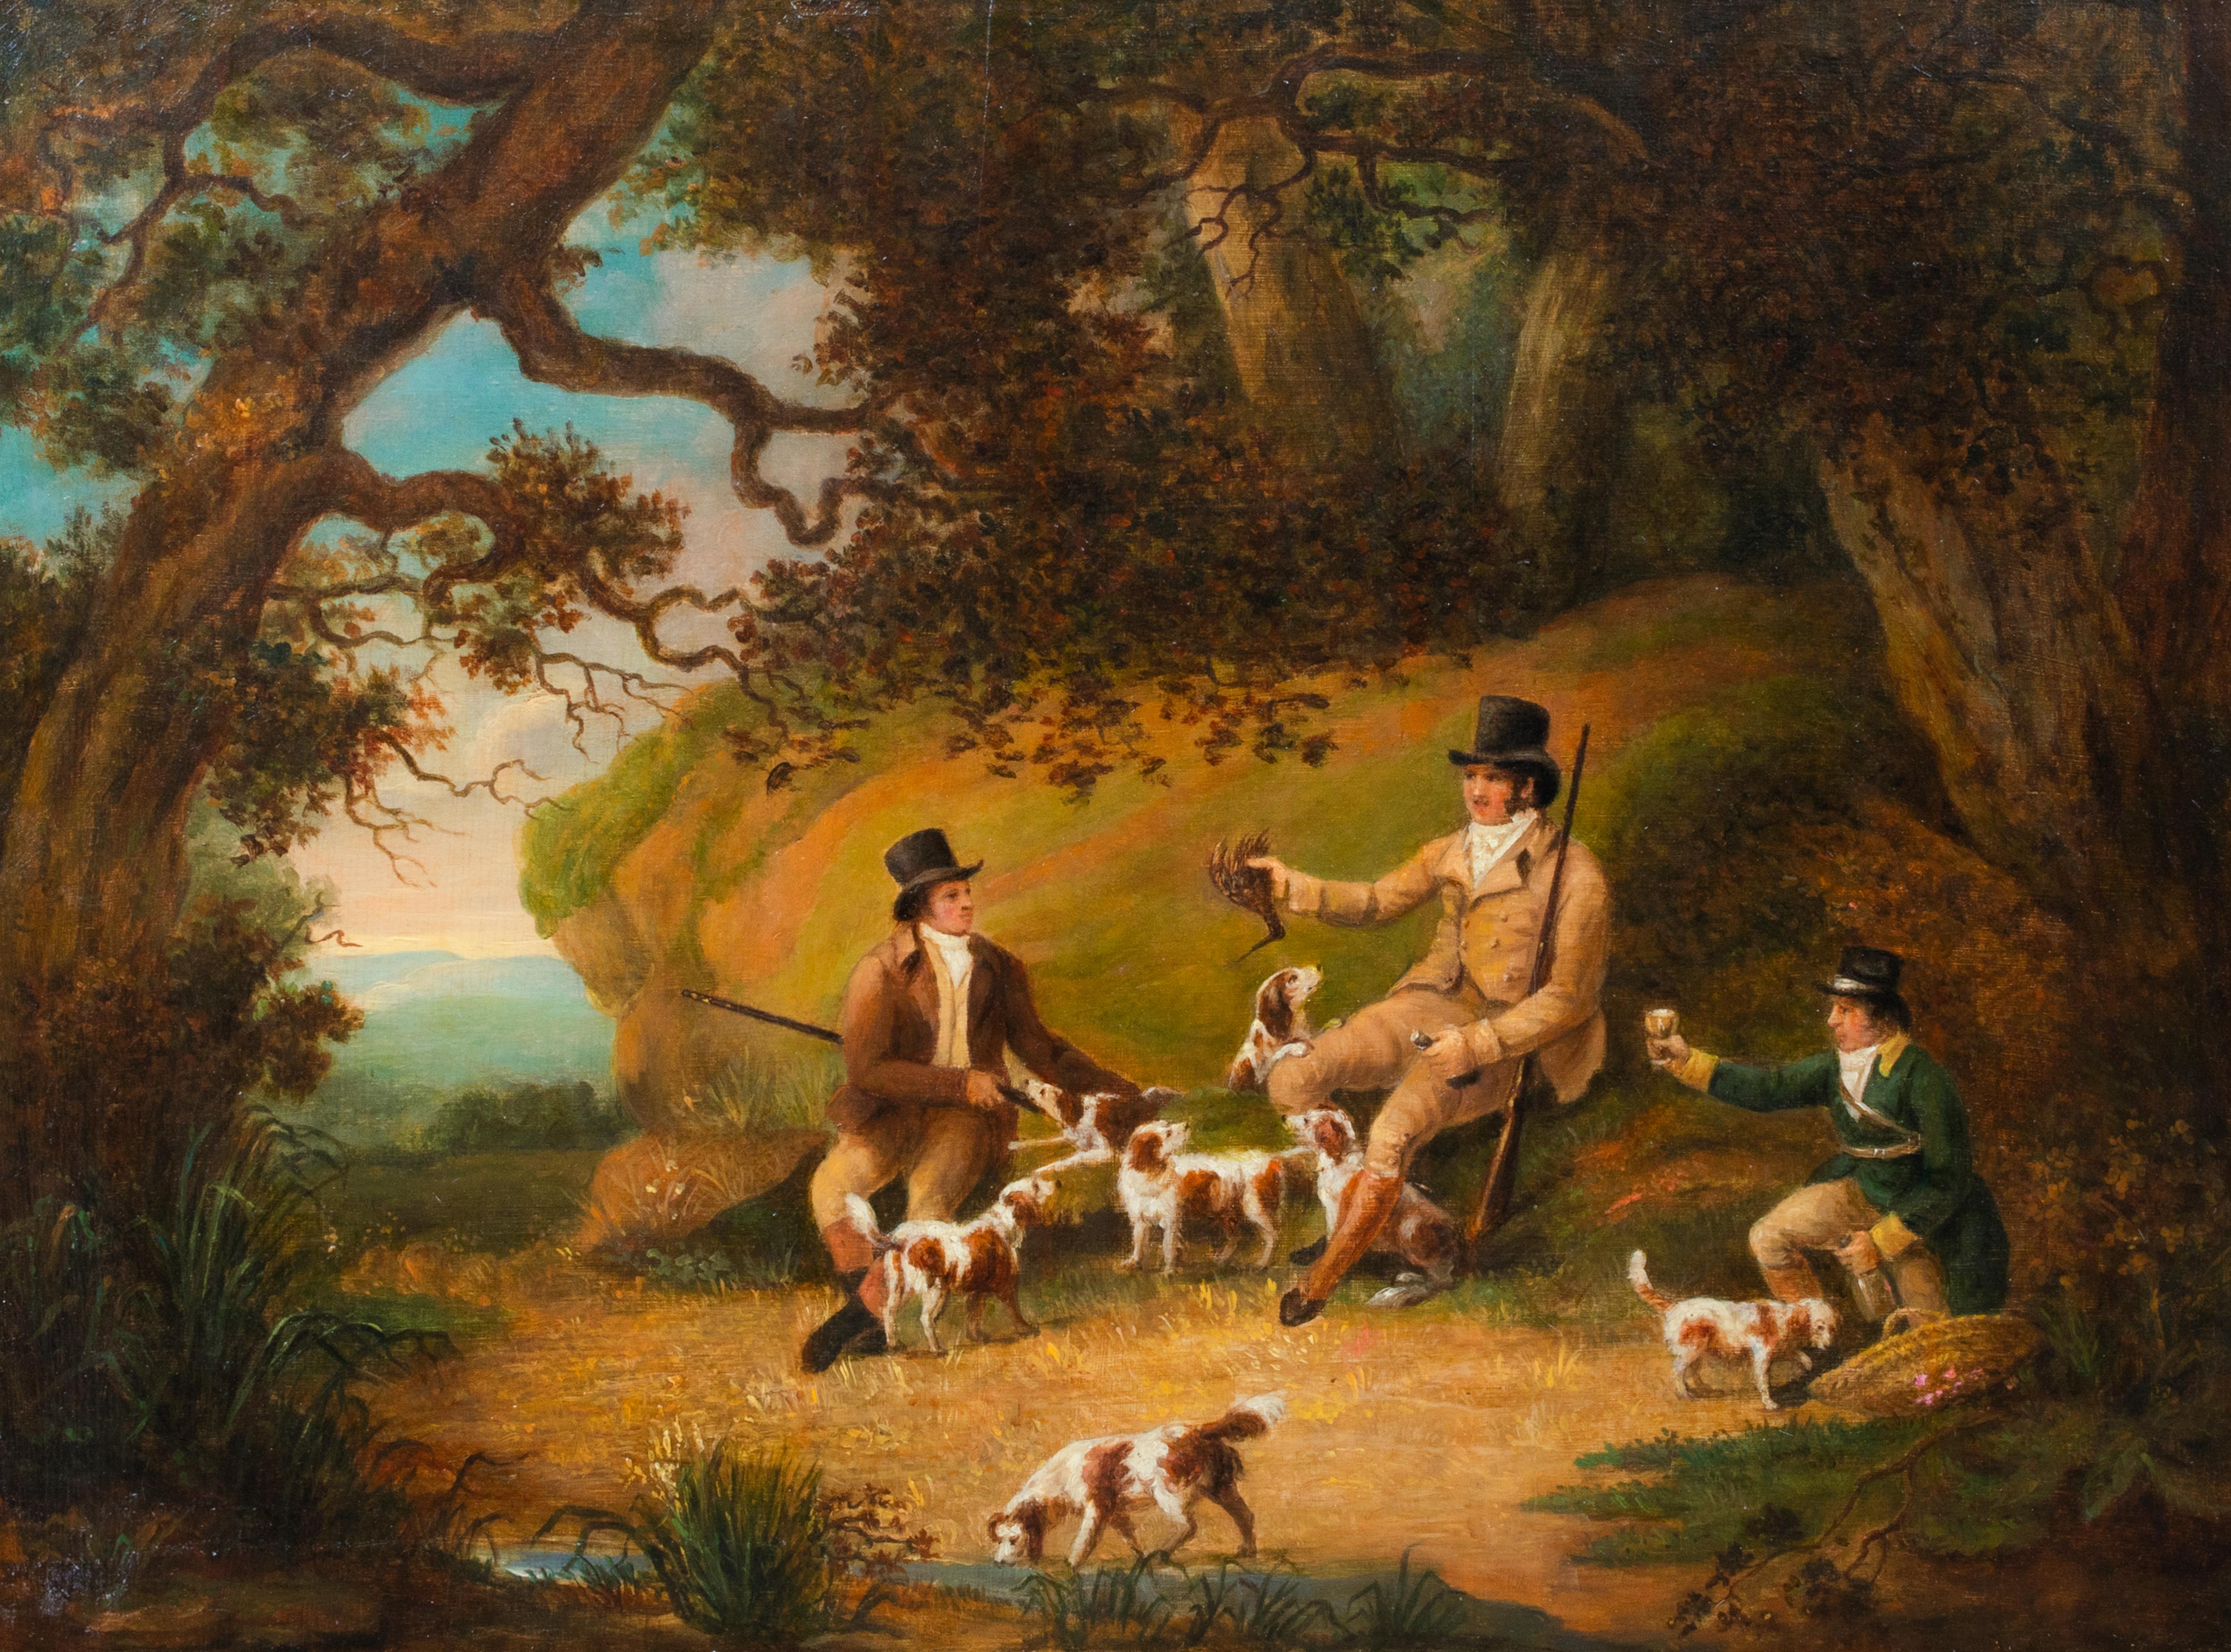 At the End Of The Day, 18th/19th Century 

by Dean Westenholme (1757-1837) to $50,000

18th Century English Fox Hunting scene as the hounds go in for the kill, oil on panel, by Dean Westenholme. Excellent quality and condition presented in a good